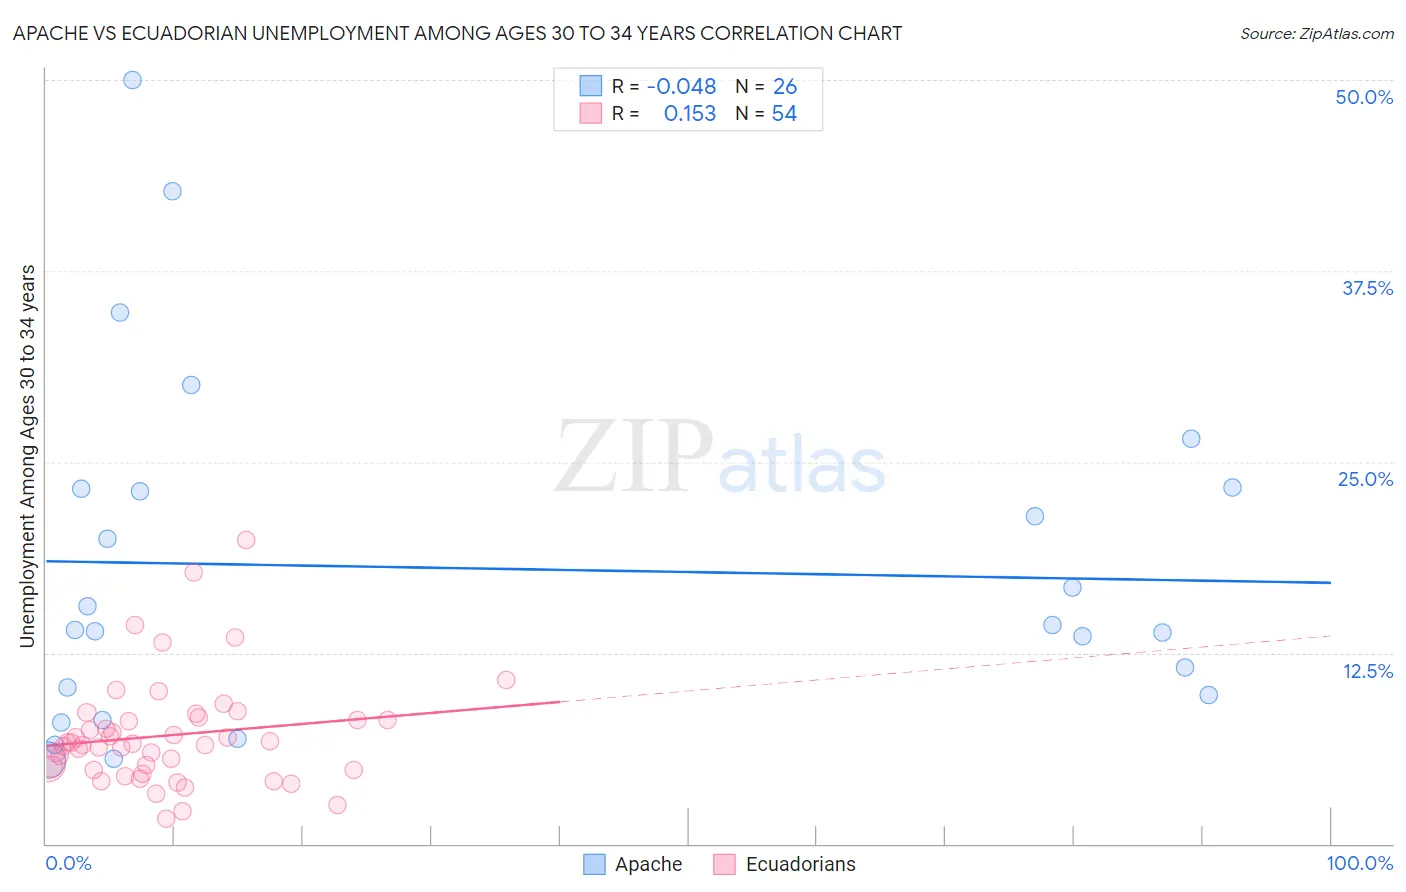 Apache vs Ecuadorian Unemployment Among Ages 30 to 34 years